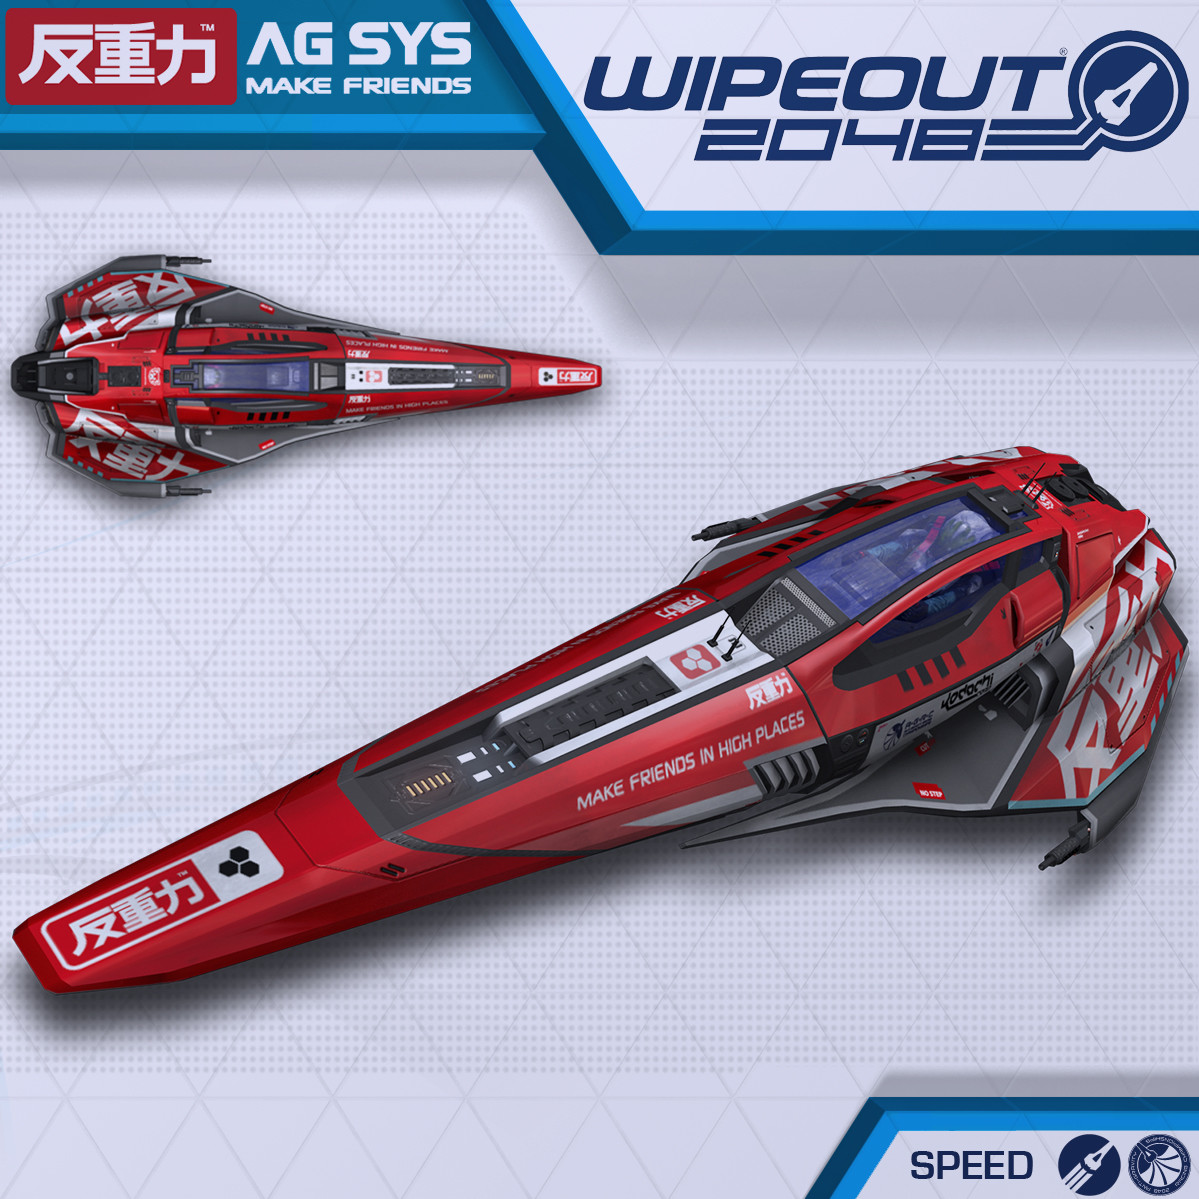 wipeout 2048 online pass game code